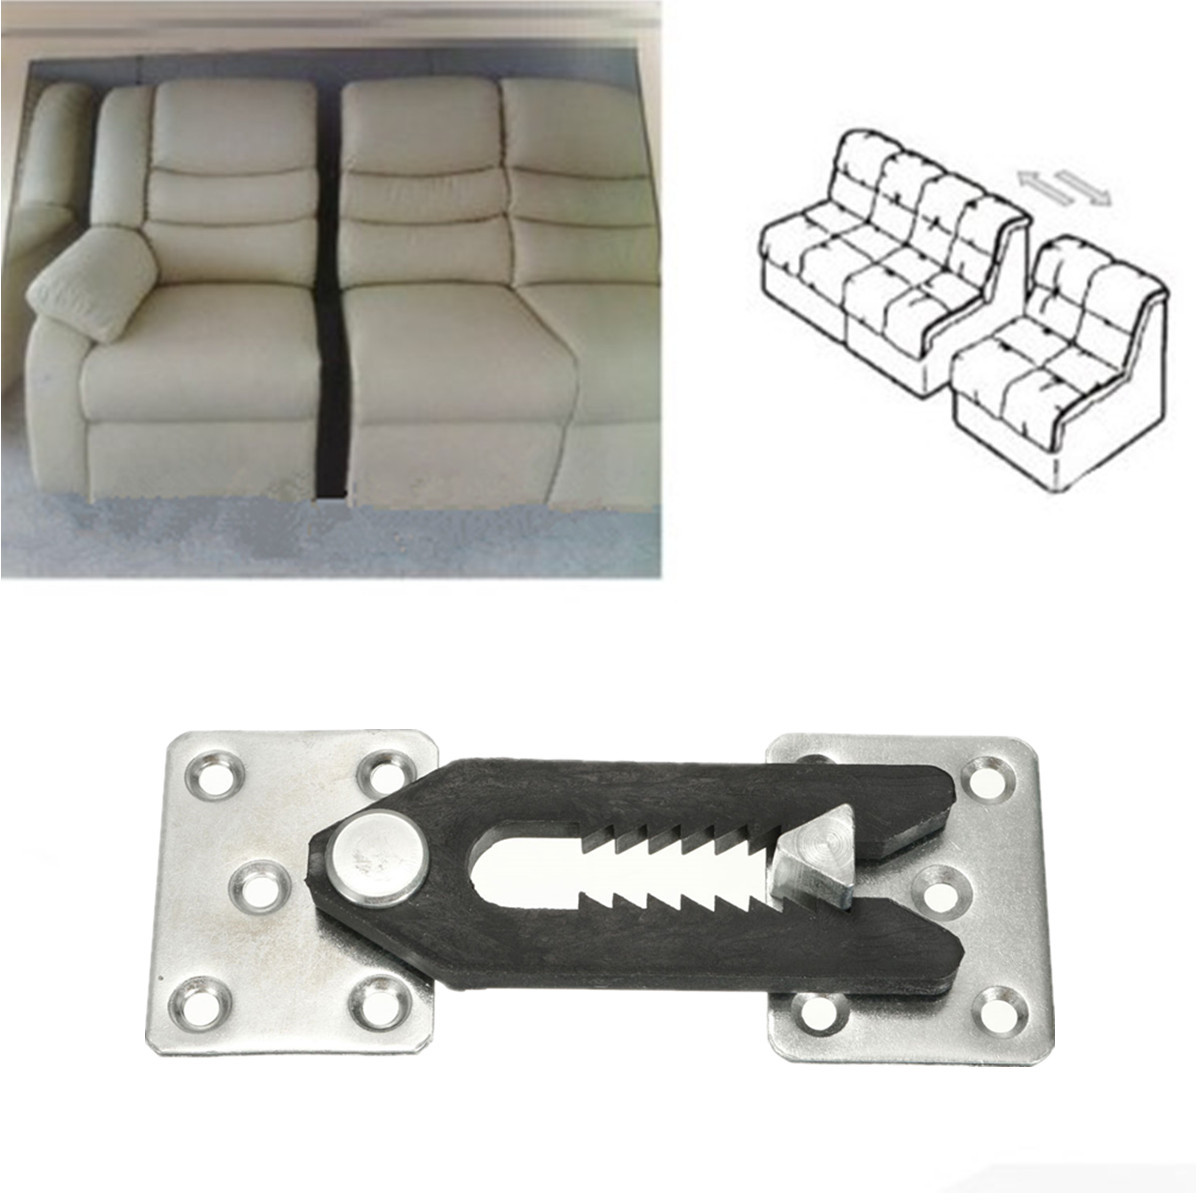 U-Type-Metal-Iron-Sheets-Plastic-Buckle-Sofa-Couch-Sectional-Furniture-Connector-1281826